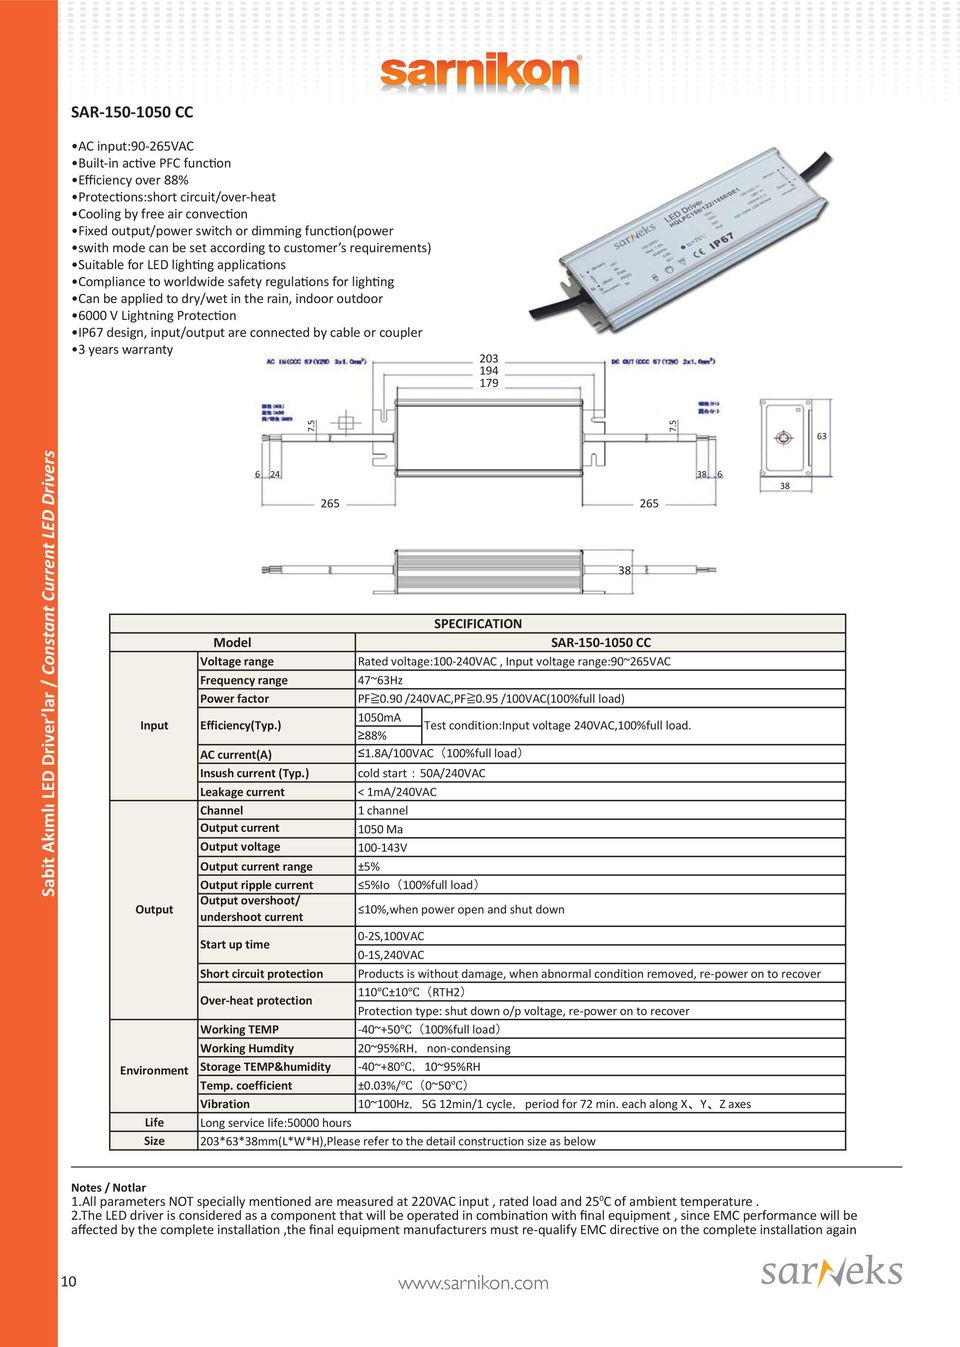 the rain, indoor outdoor 6000 V Lightning Protection IP67 design, input/output are connected by cable or coupler 3 years warranty 203 194 179 63 Sabit Akımlı LED Driver lar / Constant Current LED